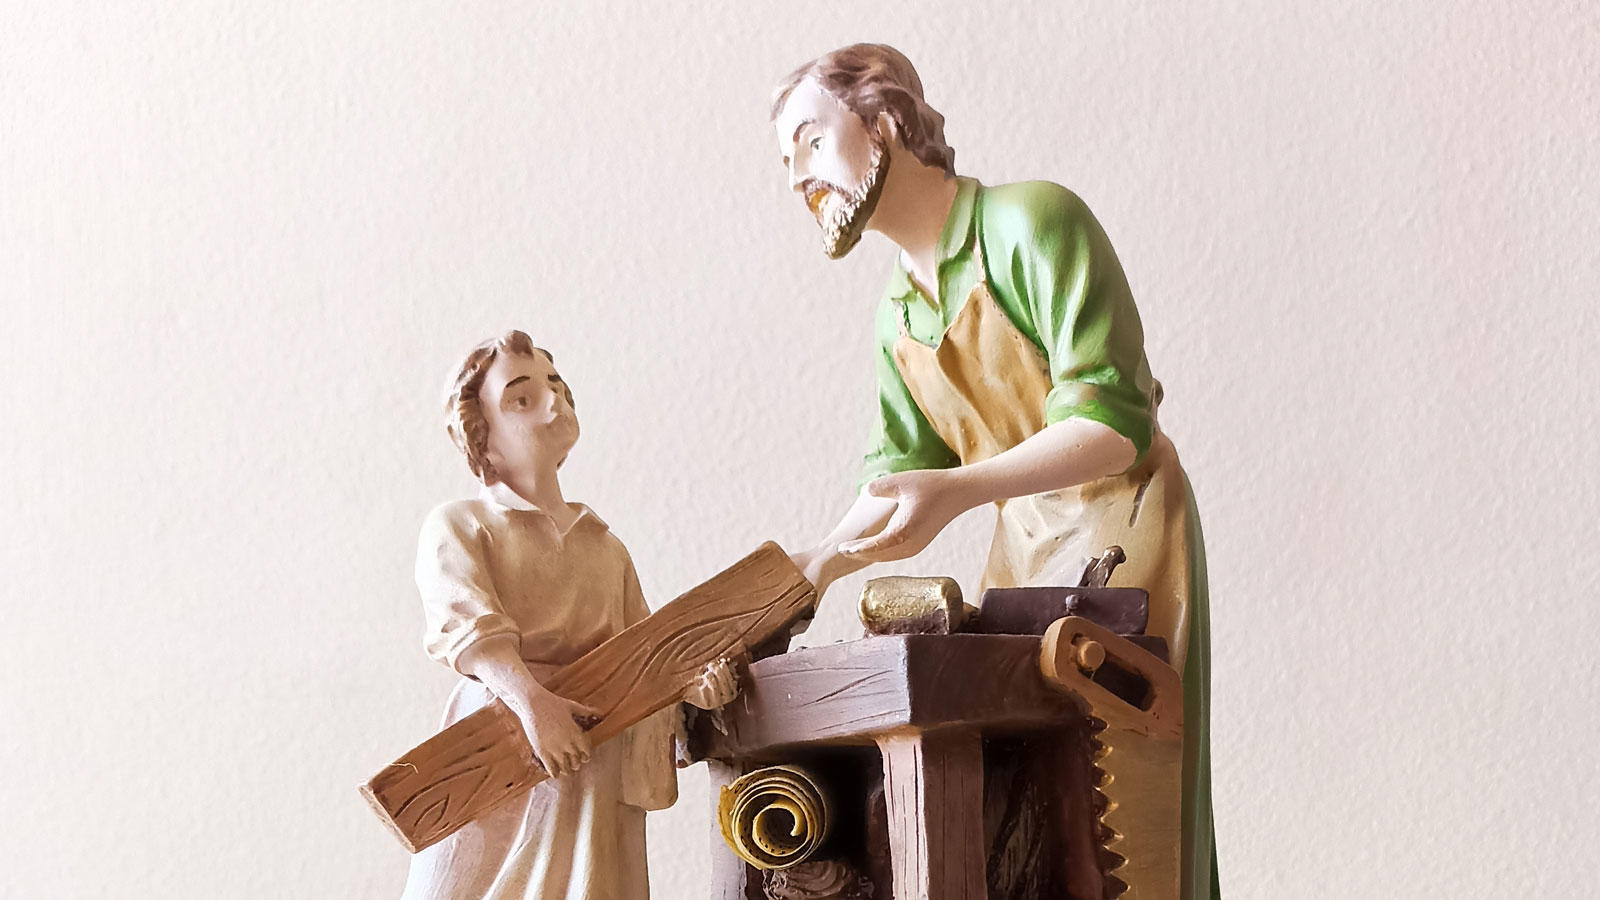 May Day: St Joseph the Worker